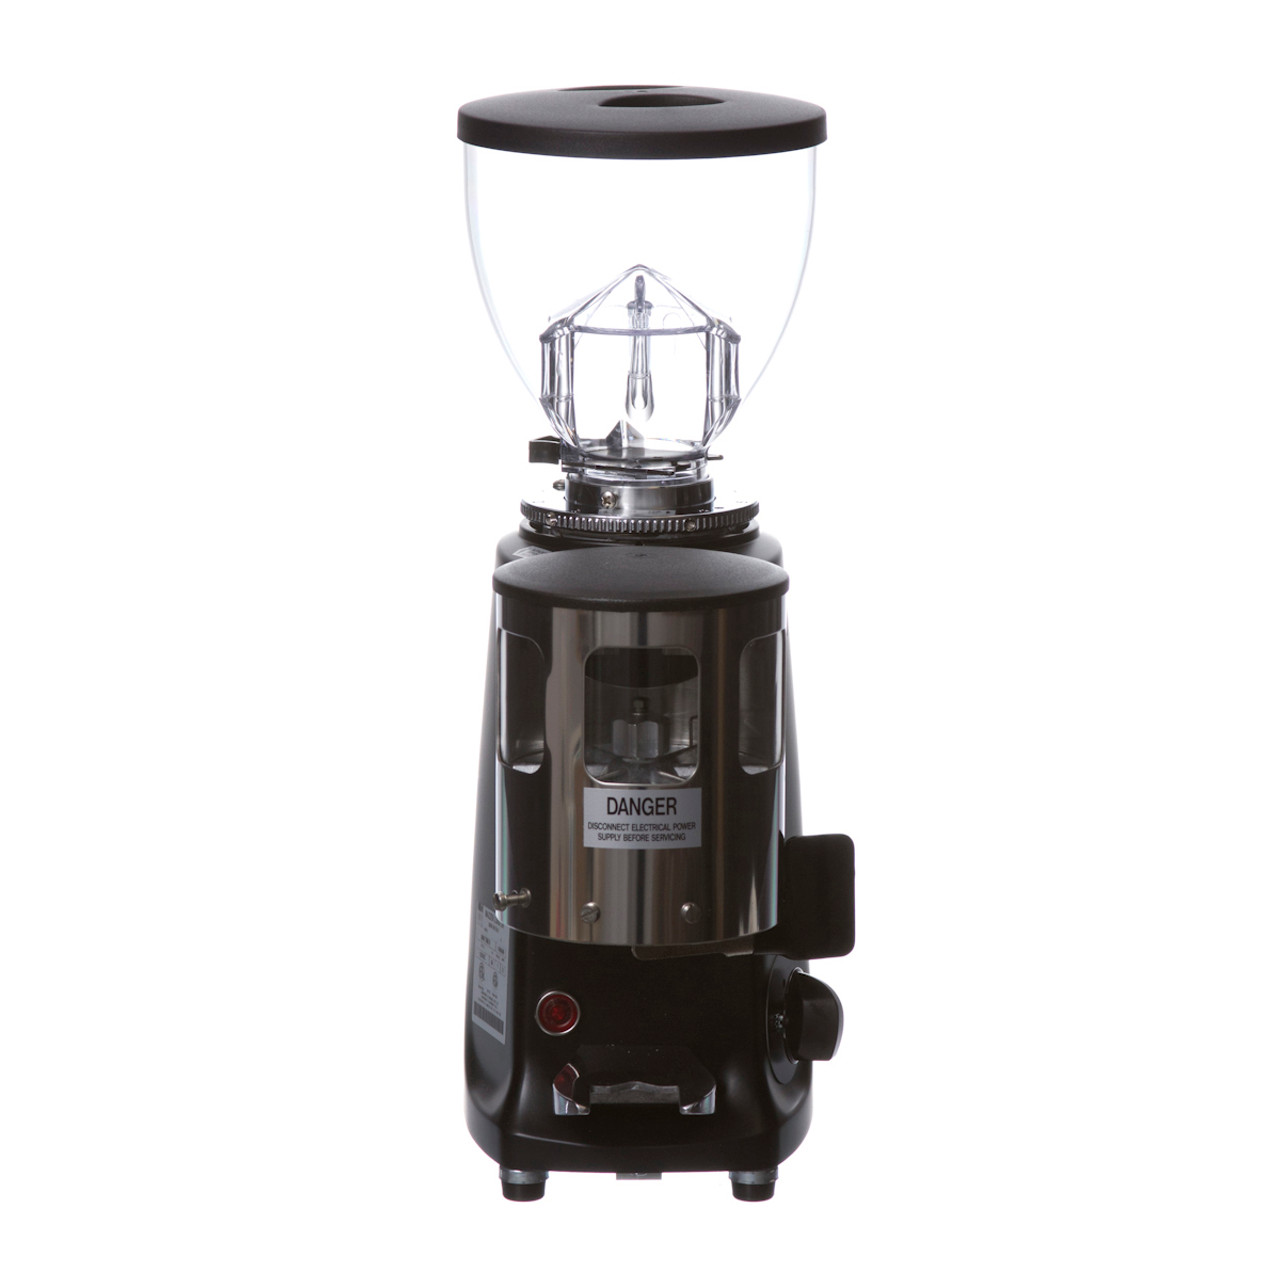 Mazzer - Mini - Commercial Coffee Grinder - Black